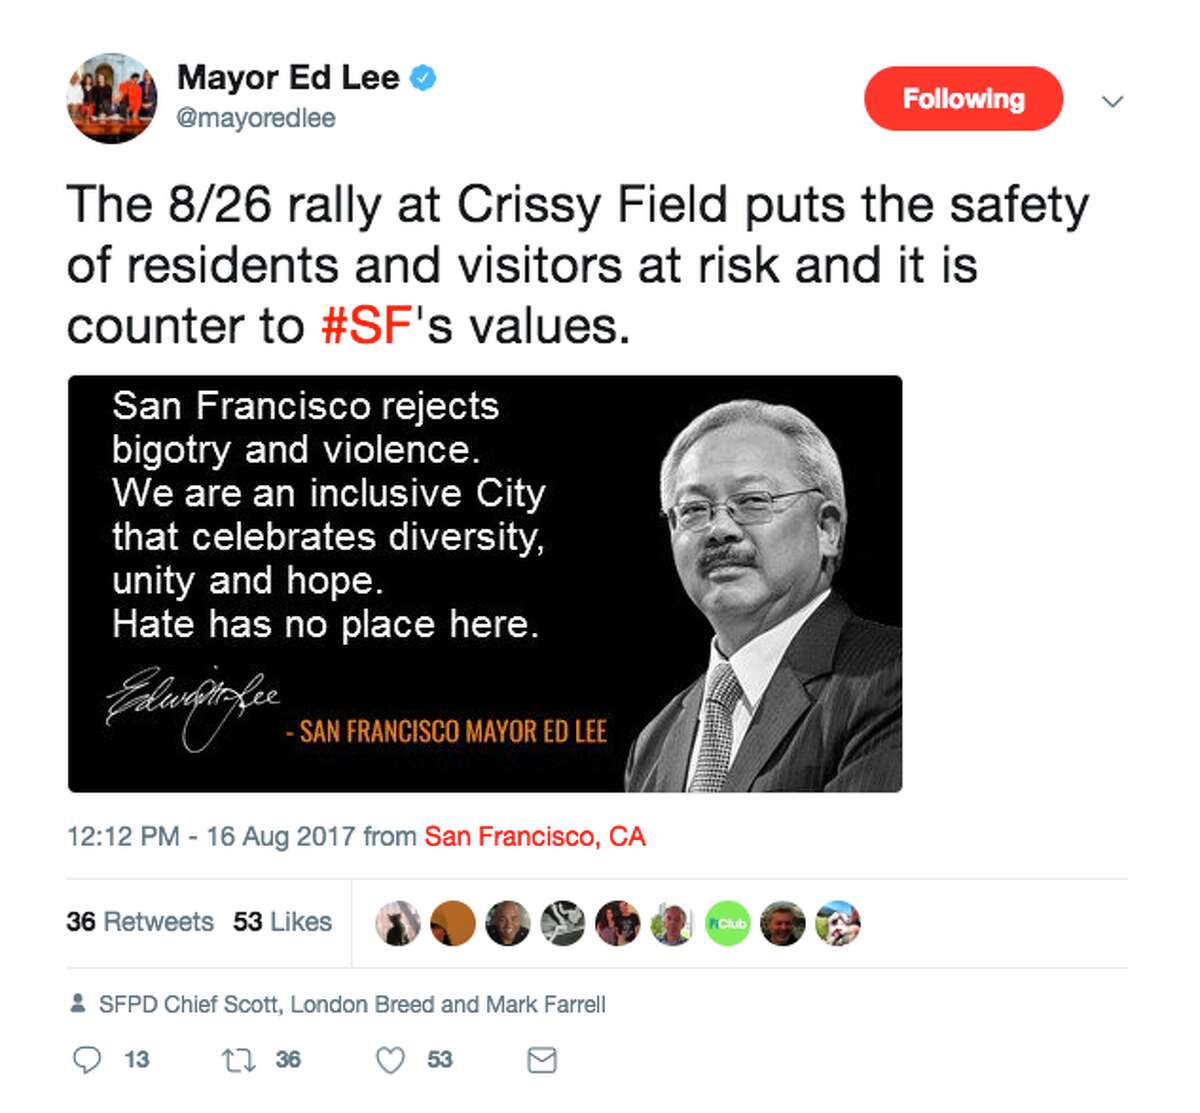 San Francisco politicians react to the planned Crissy Field rally.